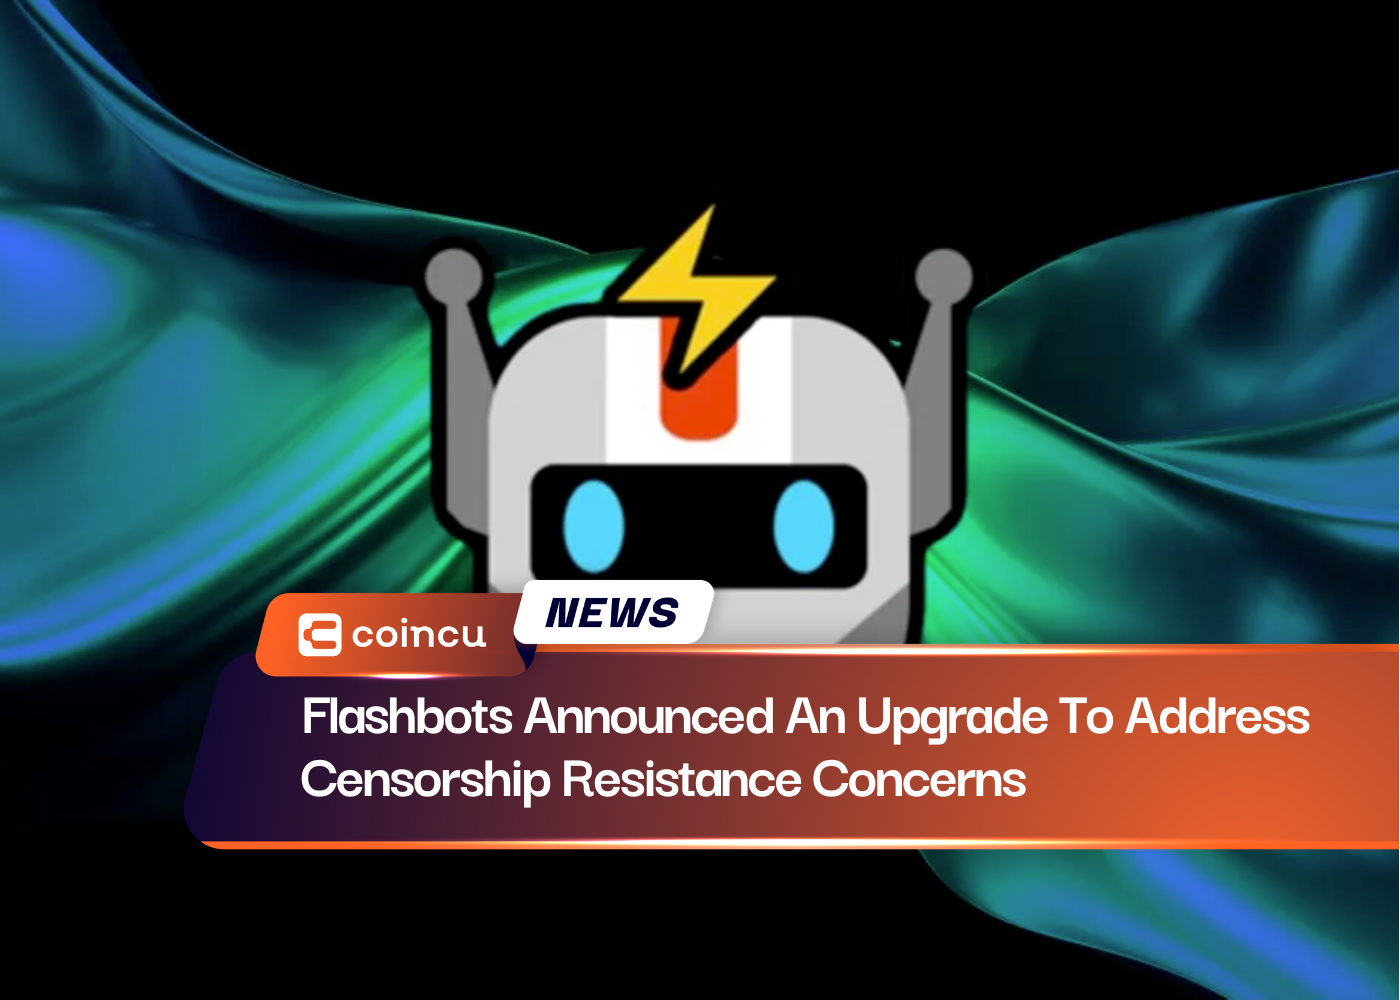 Flashbots Announced An Upgrade To Address Censorship Resistance Concerns